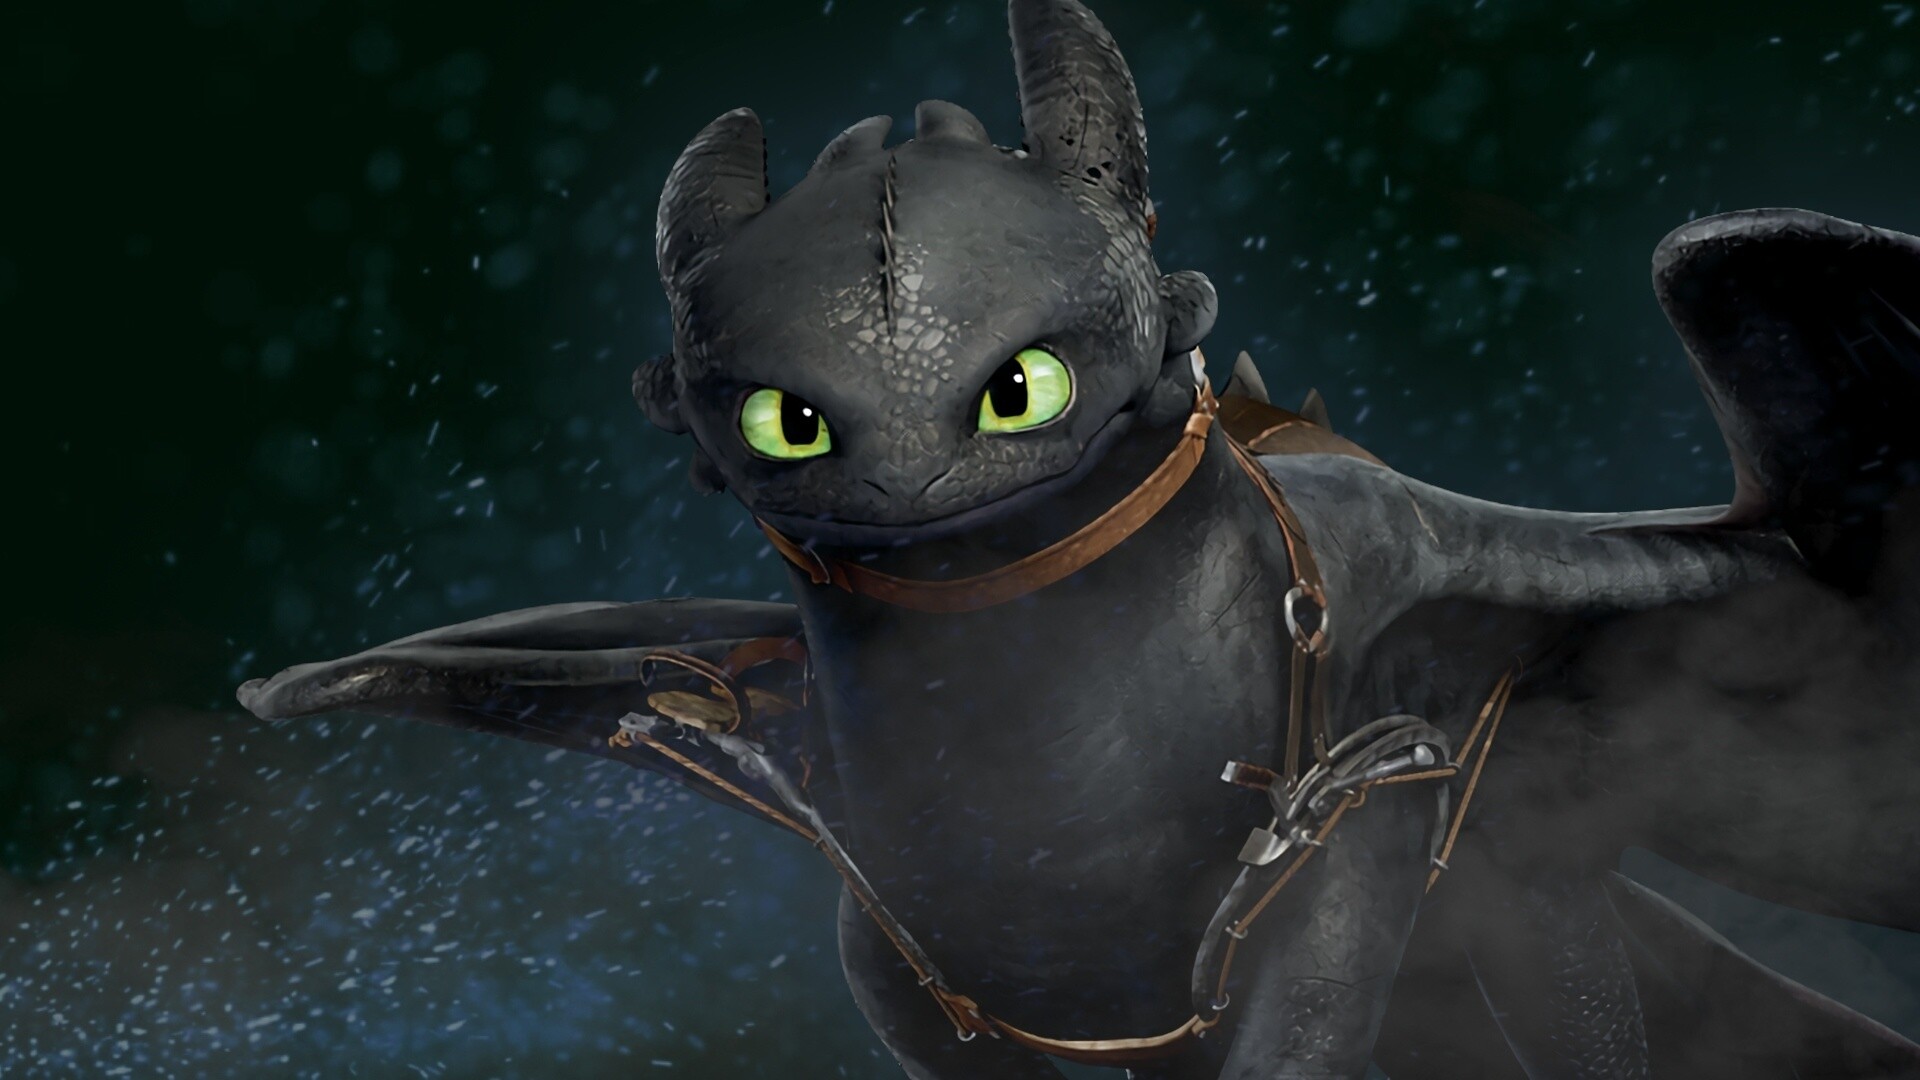 Toothless, How to Train Your Dragon Wallpaper, 1920x1080 Full HD Desktop